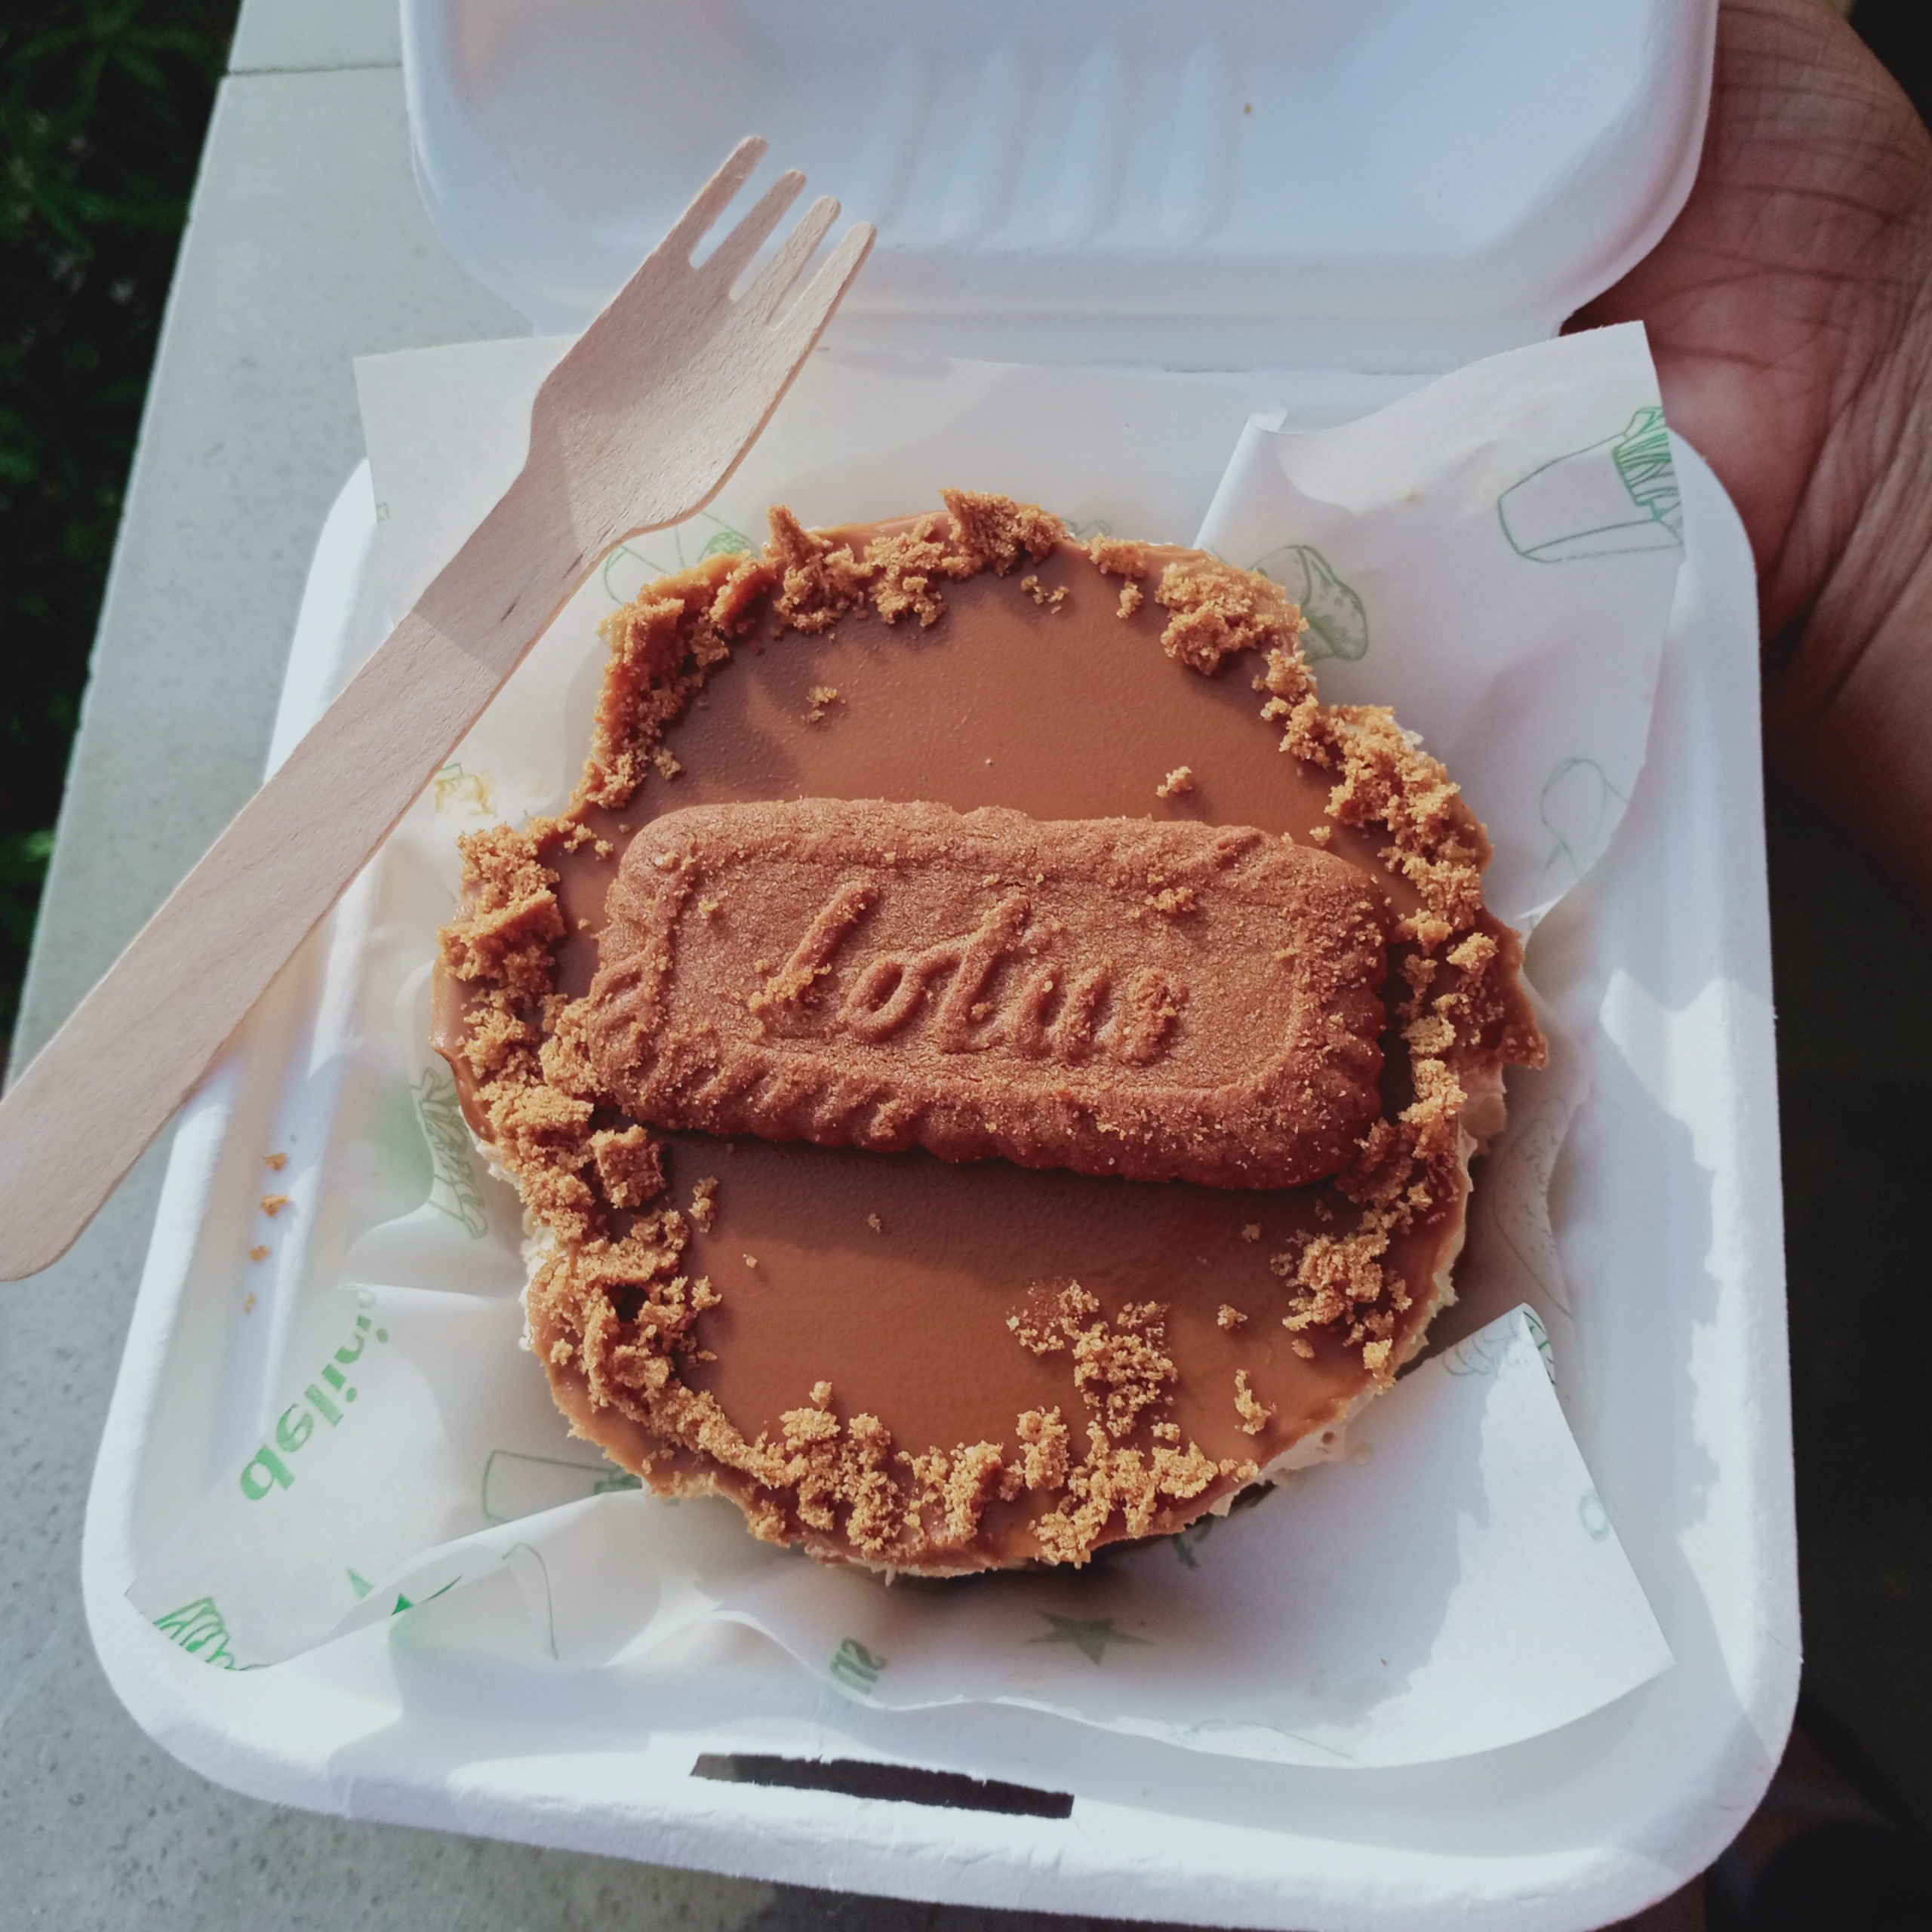 Lotus Biscoff Cheesecake Designs, Images, Price Near Me